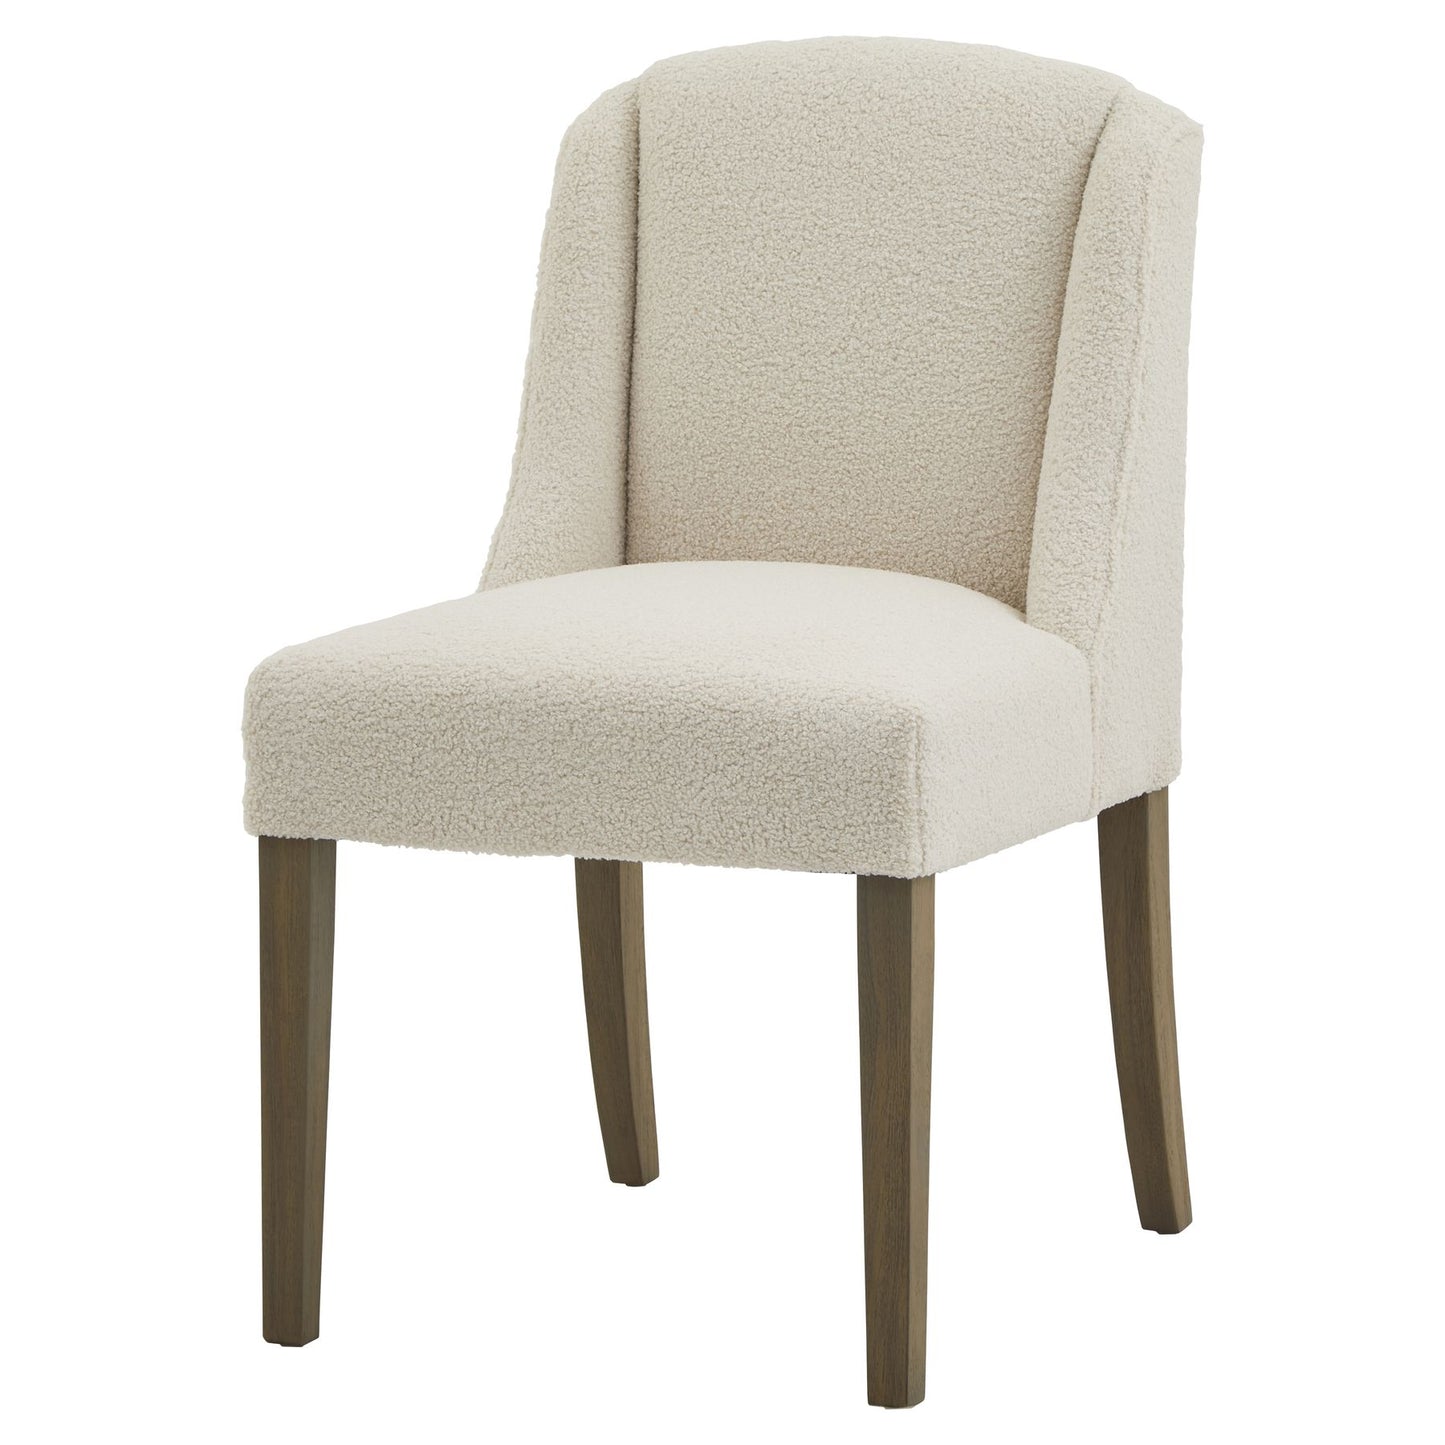 Compton Bouclé Dining Chair - PRE-ORDER FOR THE END OF JULY